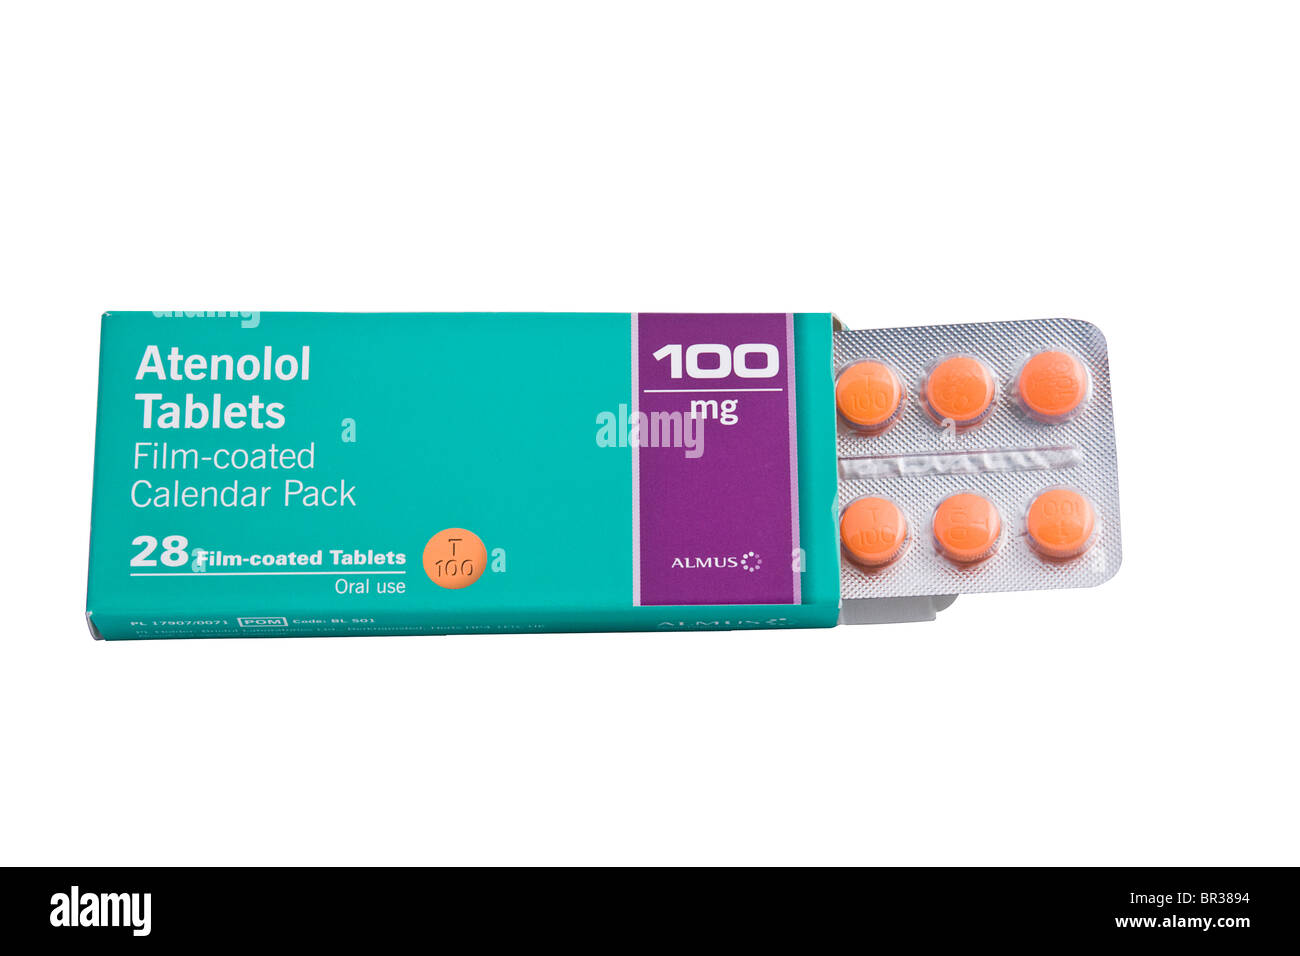 A packet of Atenolol tablets used to treat hypertension Stock Photo